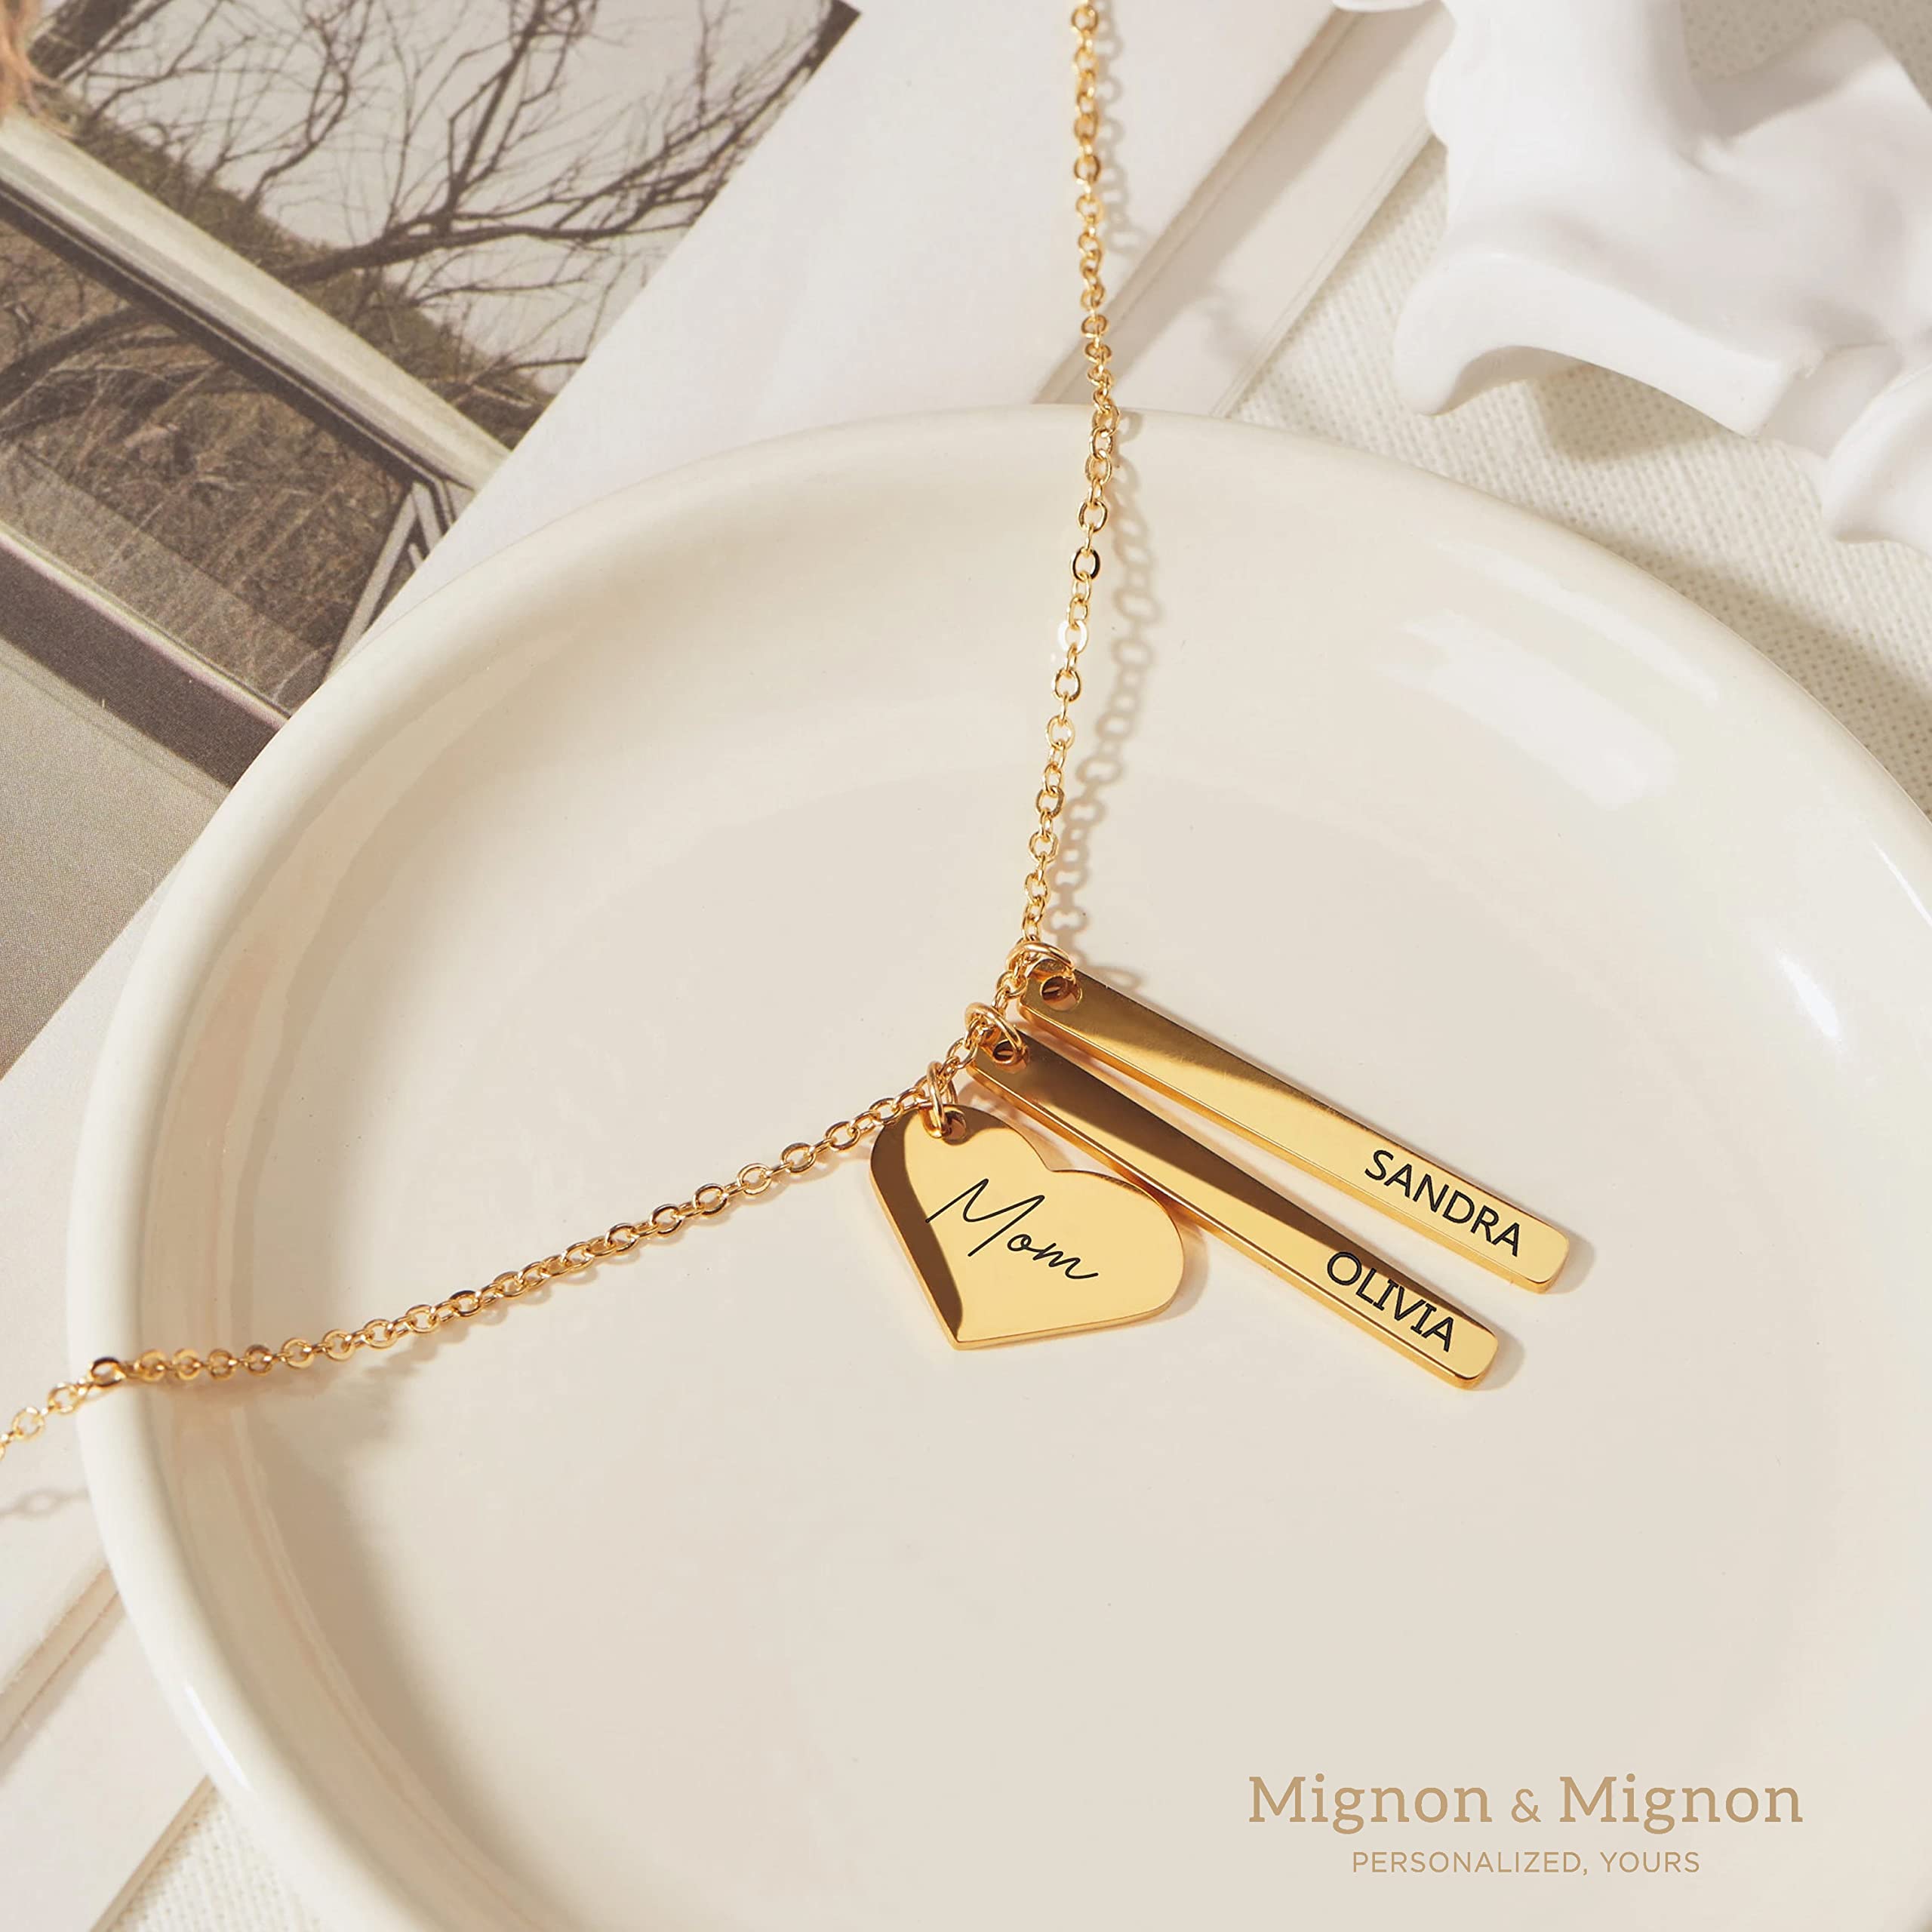 MignonandMignon Mothers Day Necklace with Kids Names Heart Vertical Bar Necklaces for Women Personalized Mom Gifts from Daughter Custom Jewelry Family Initial Name Best Friend Friendship Gift - H6N